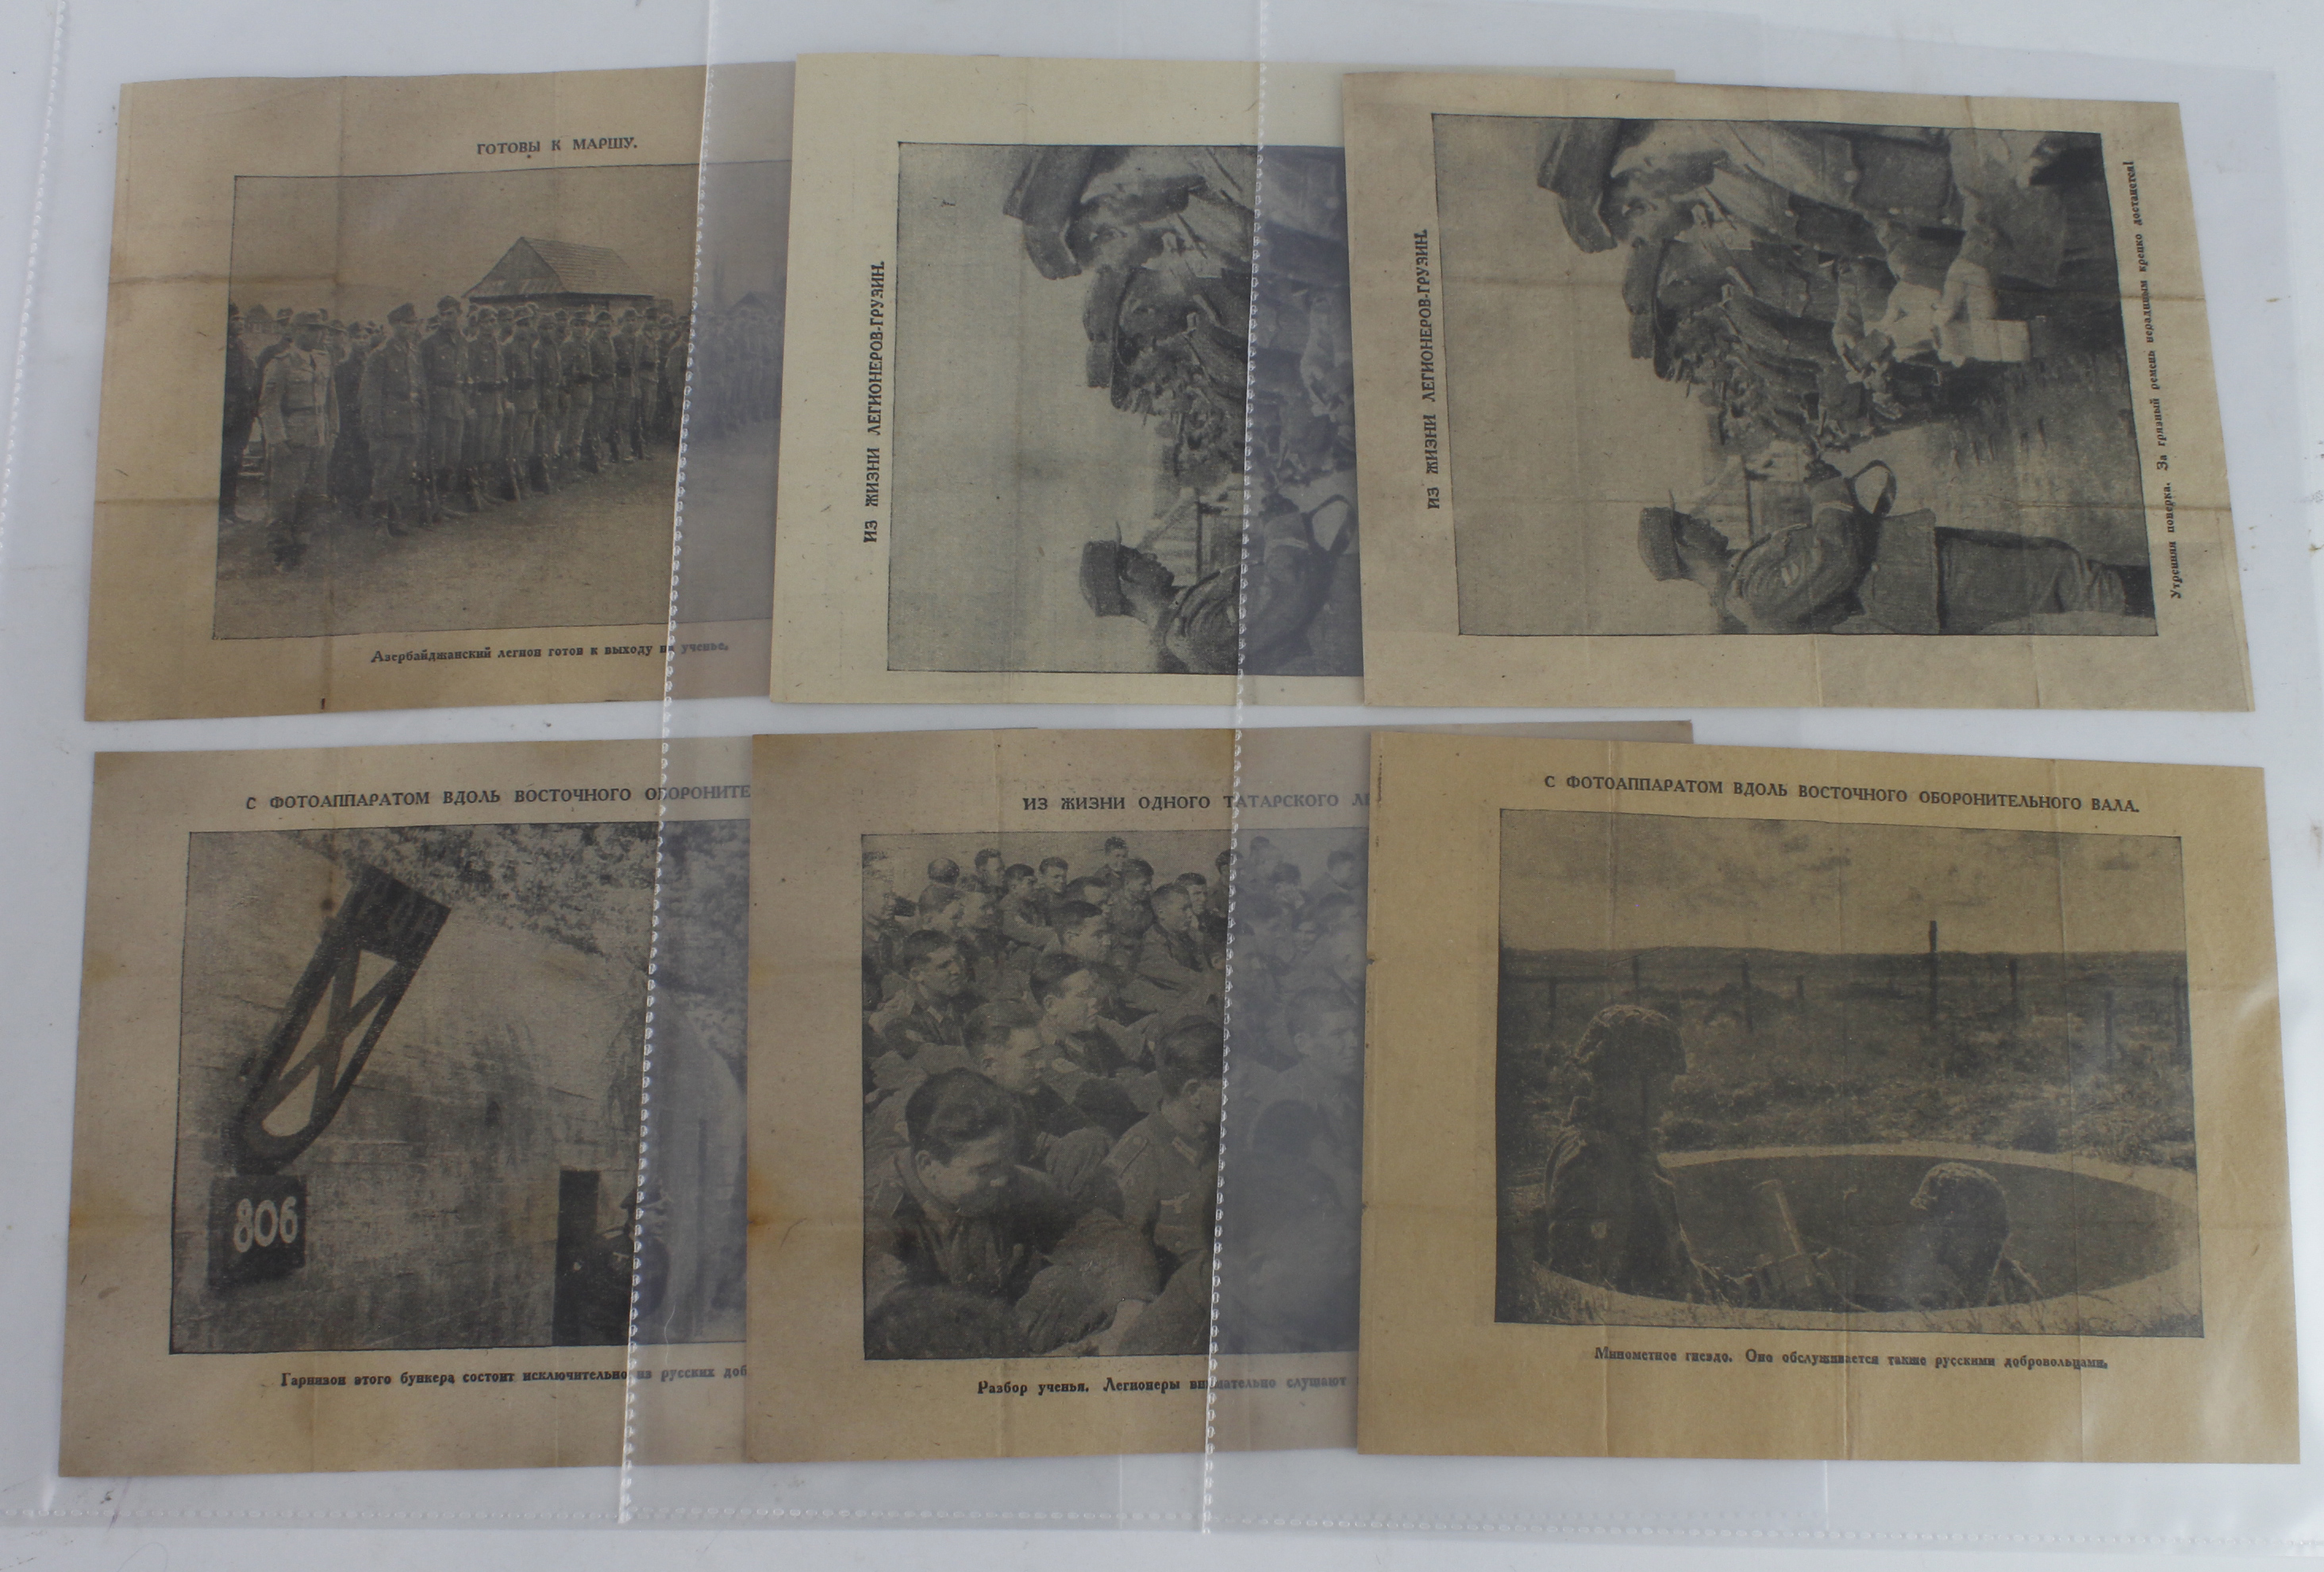 German WW2 collection of propaganda leaflets dropped on the Russians, Germans etc.